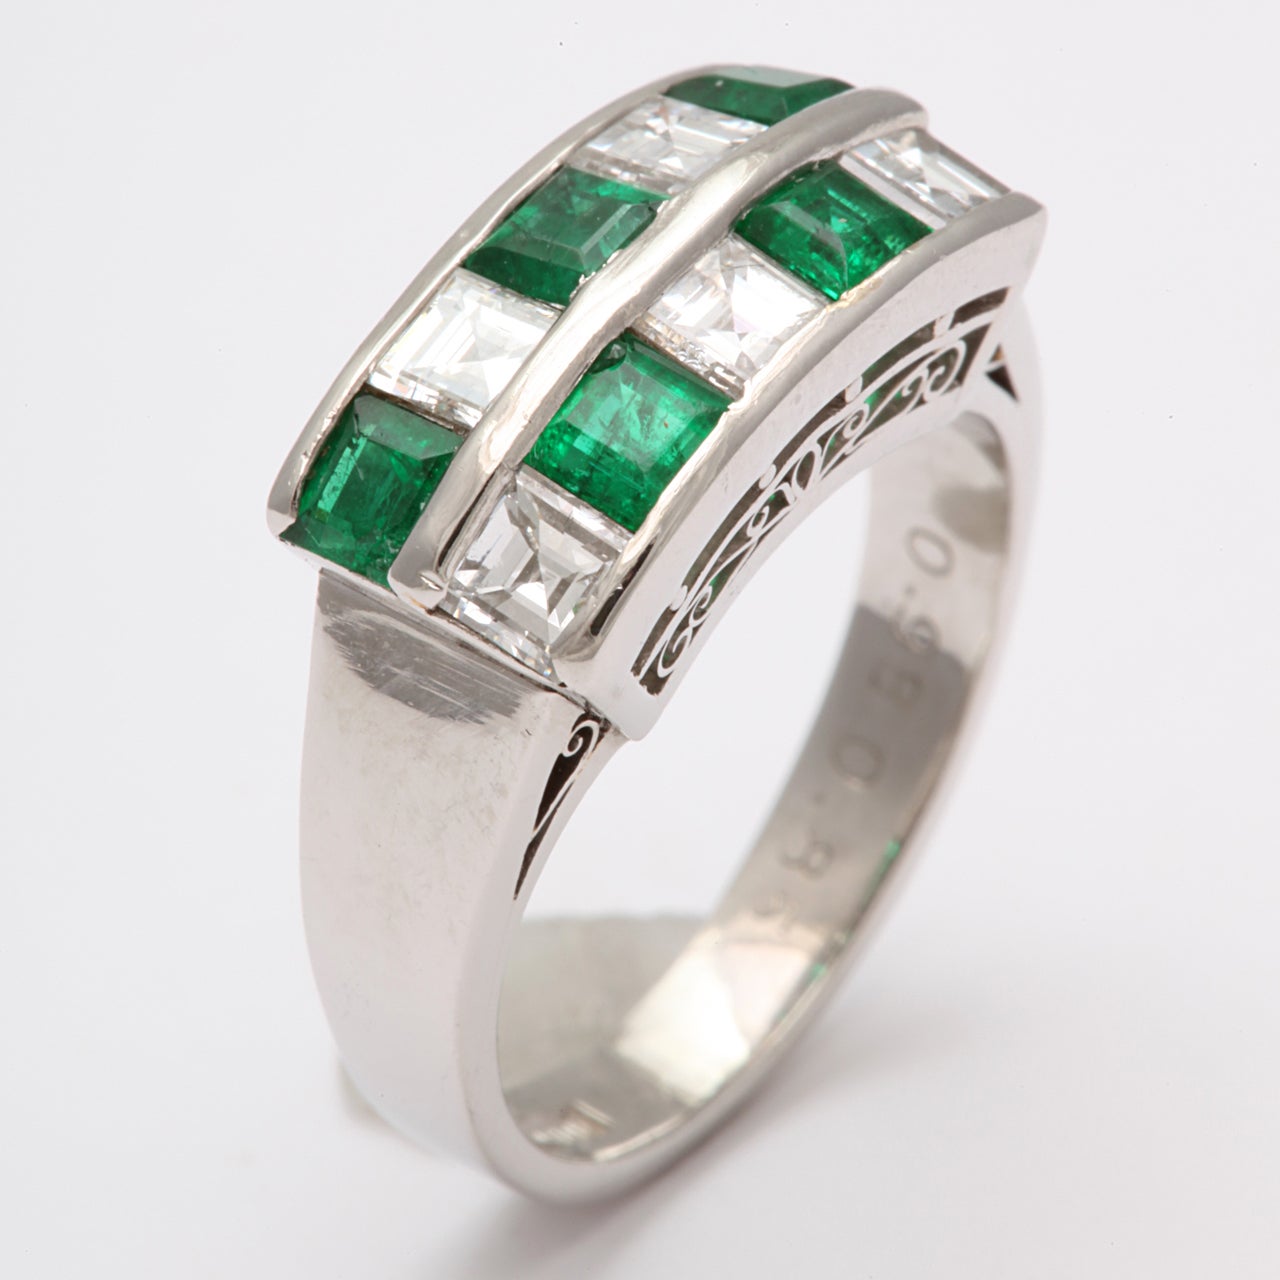 Alternating Emerald & Diamond Checkerboard ring with wide shank mounted on an elaborate Openwork Gallery.  Stones engraved  in the band as to size. Emeralds 95pts. Diamonds 85pts.  Inscribed 18ct